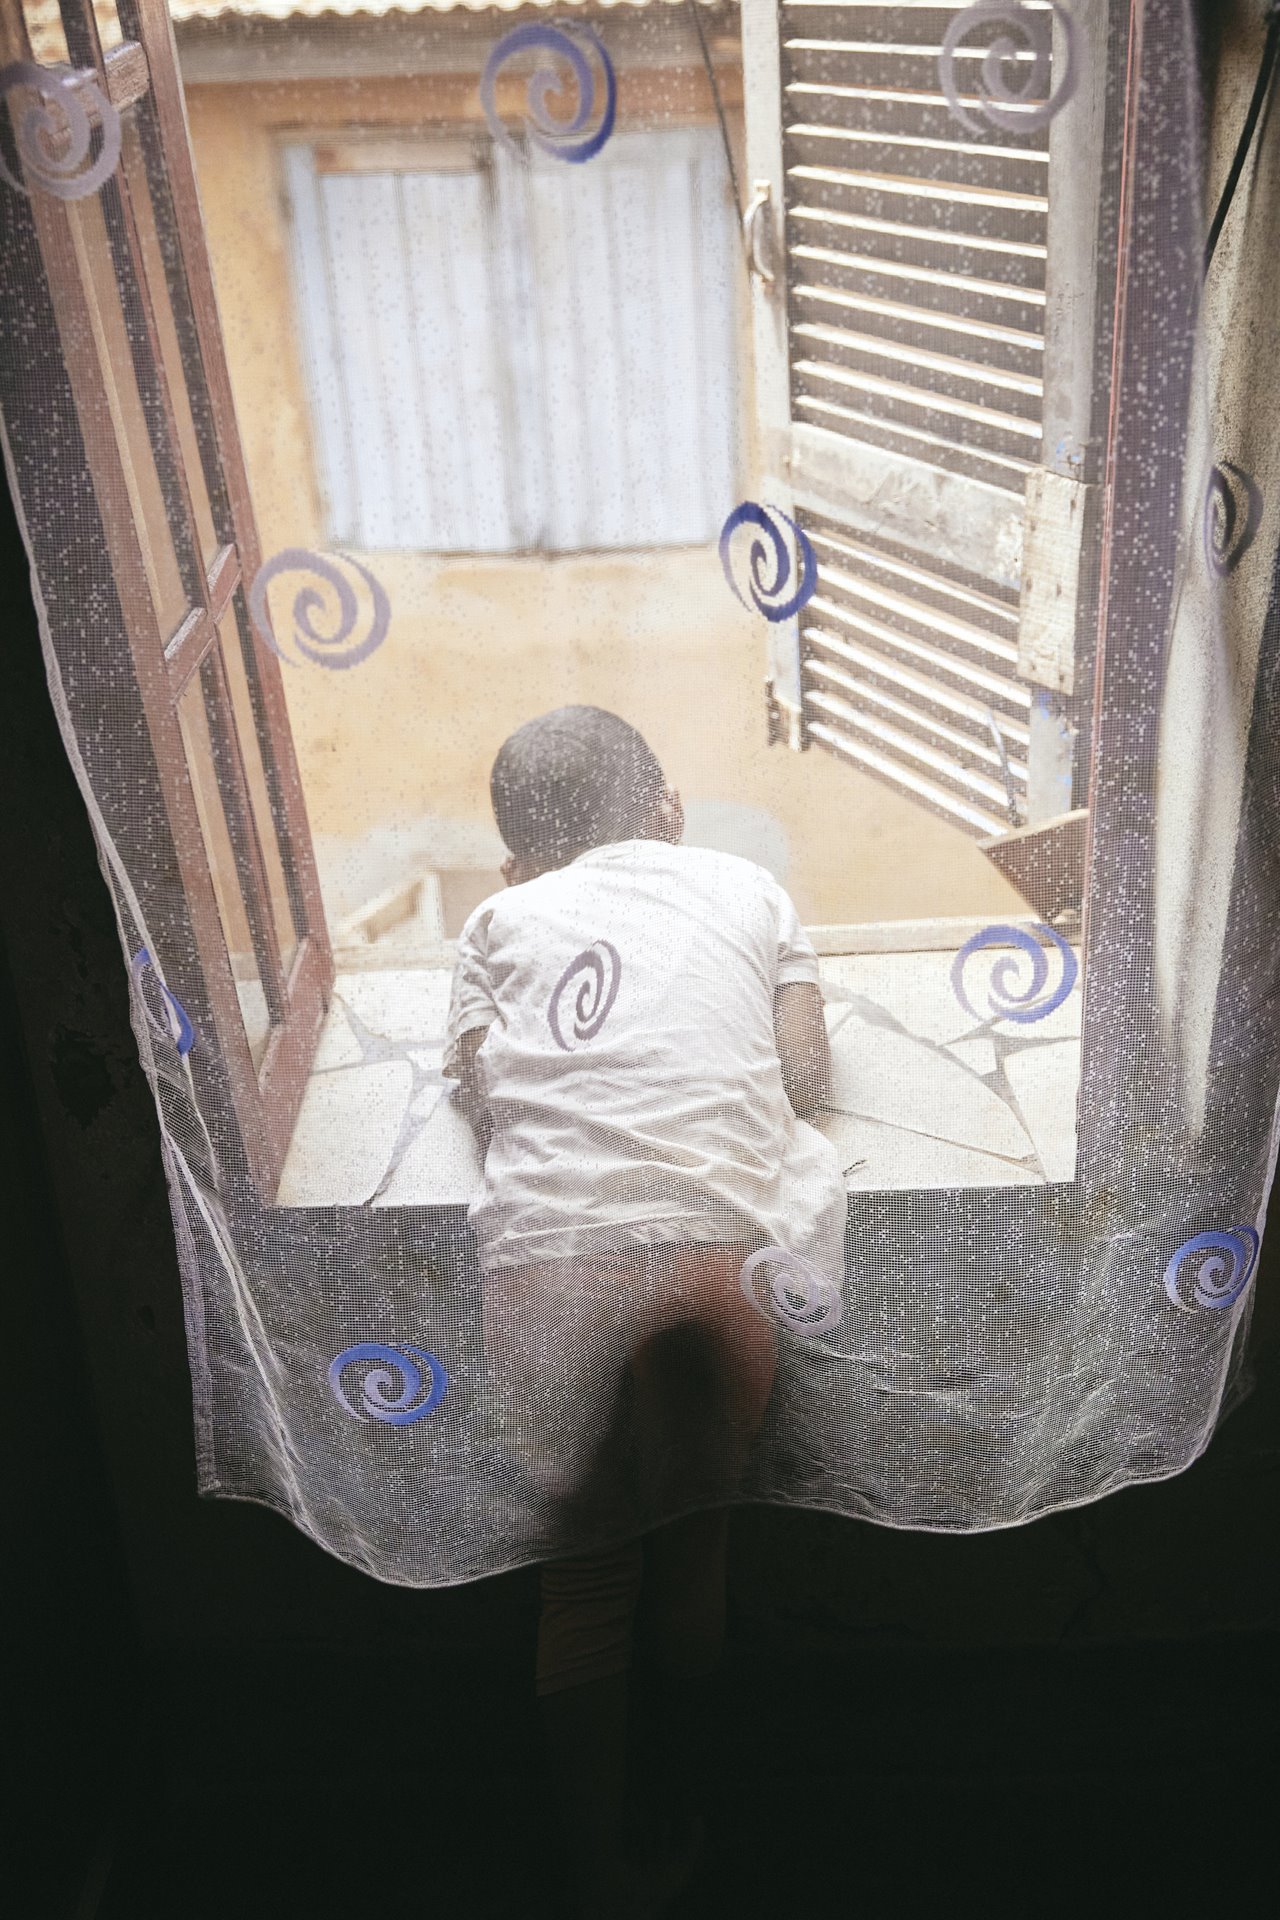 Odliatemix looks out the window of the bedroom she shares with her mother and grandfather, Dada Paul, in Antananarivo, Madagascar. She looks up to Dada Paul as a father figure, as her mother, Fara, is a single parent.